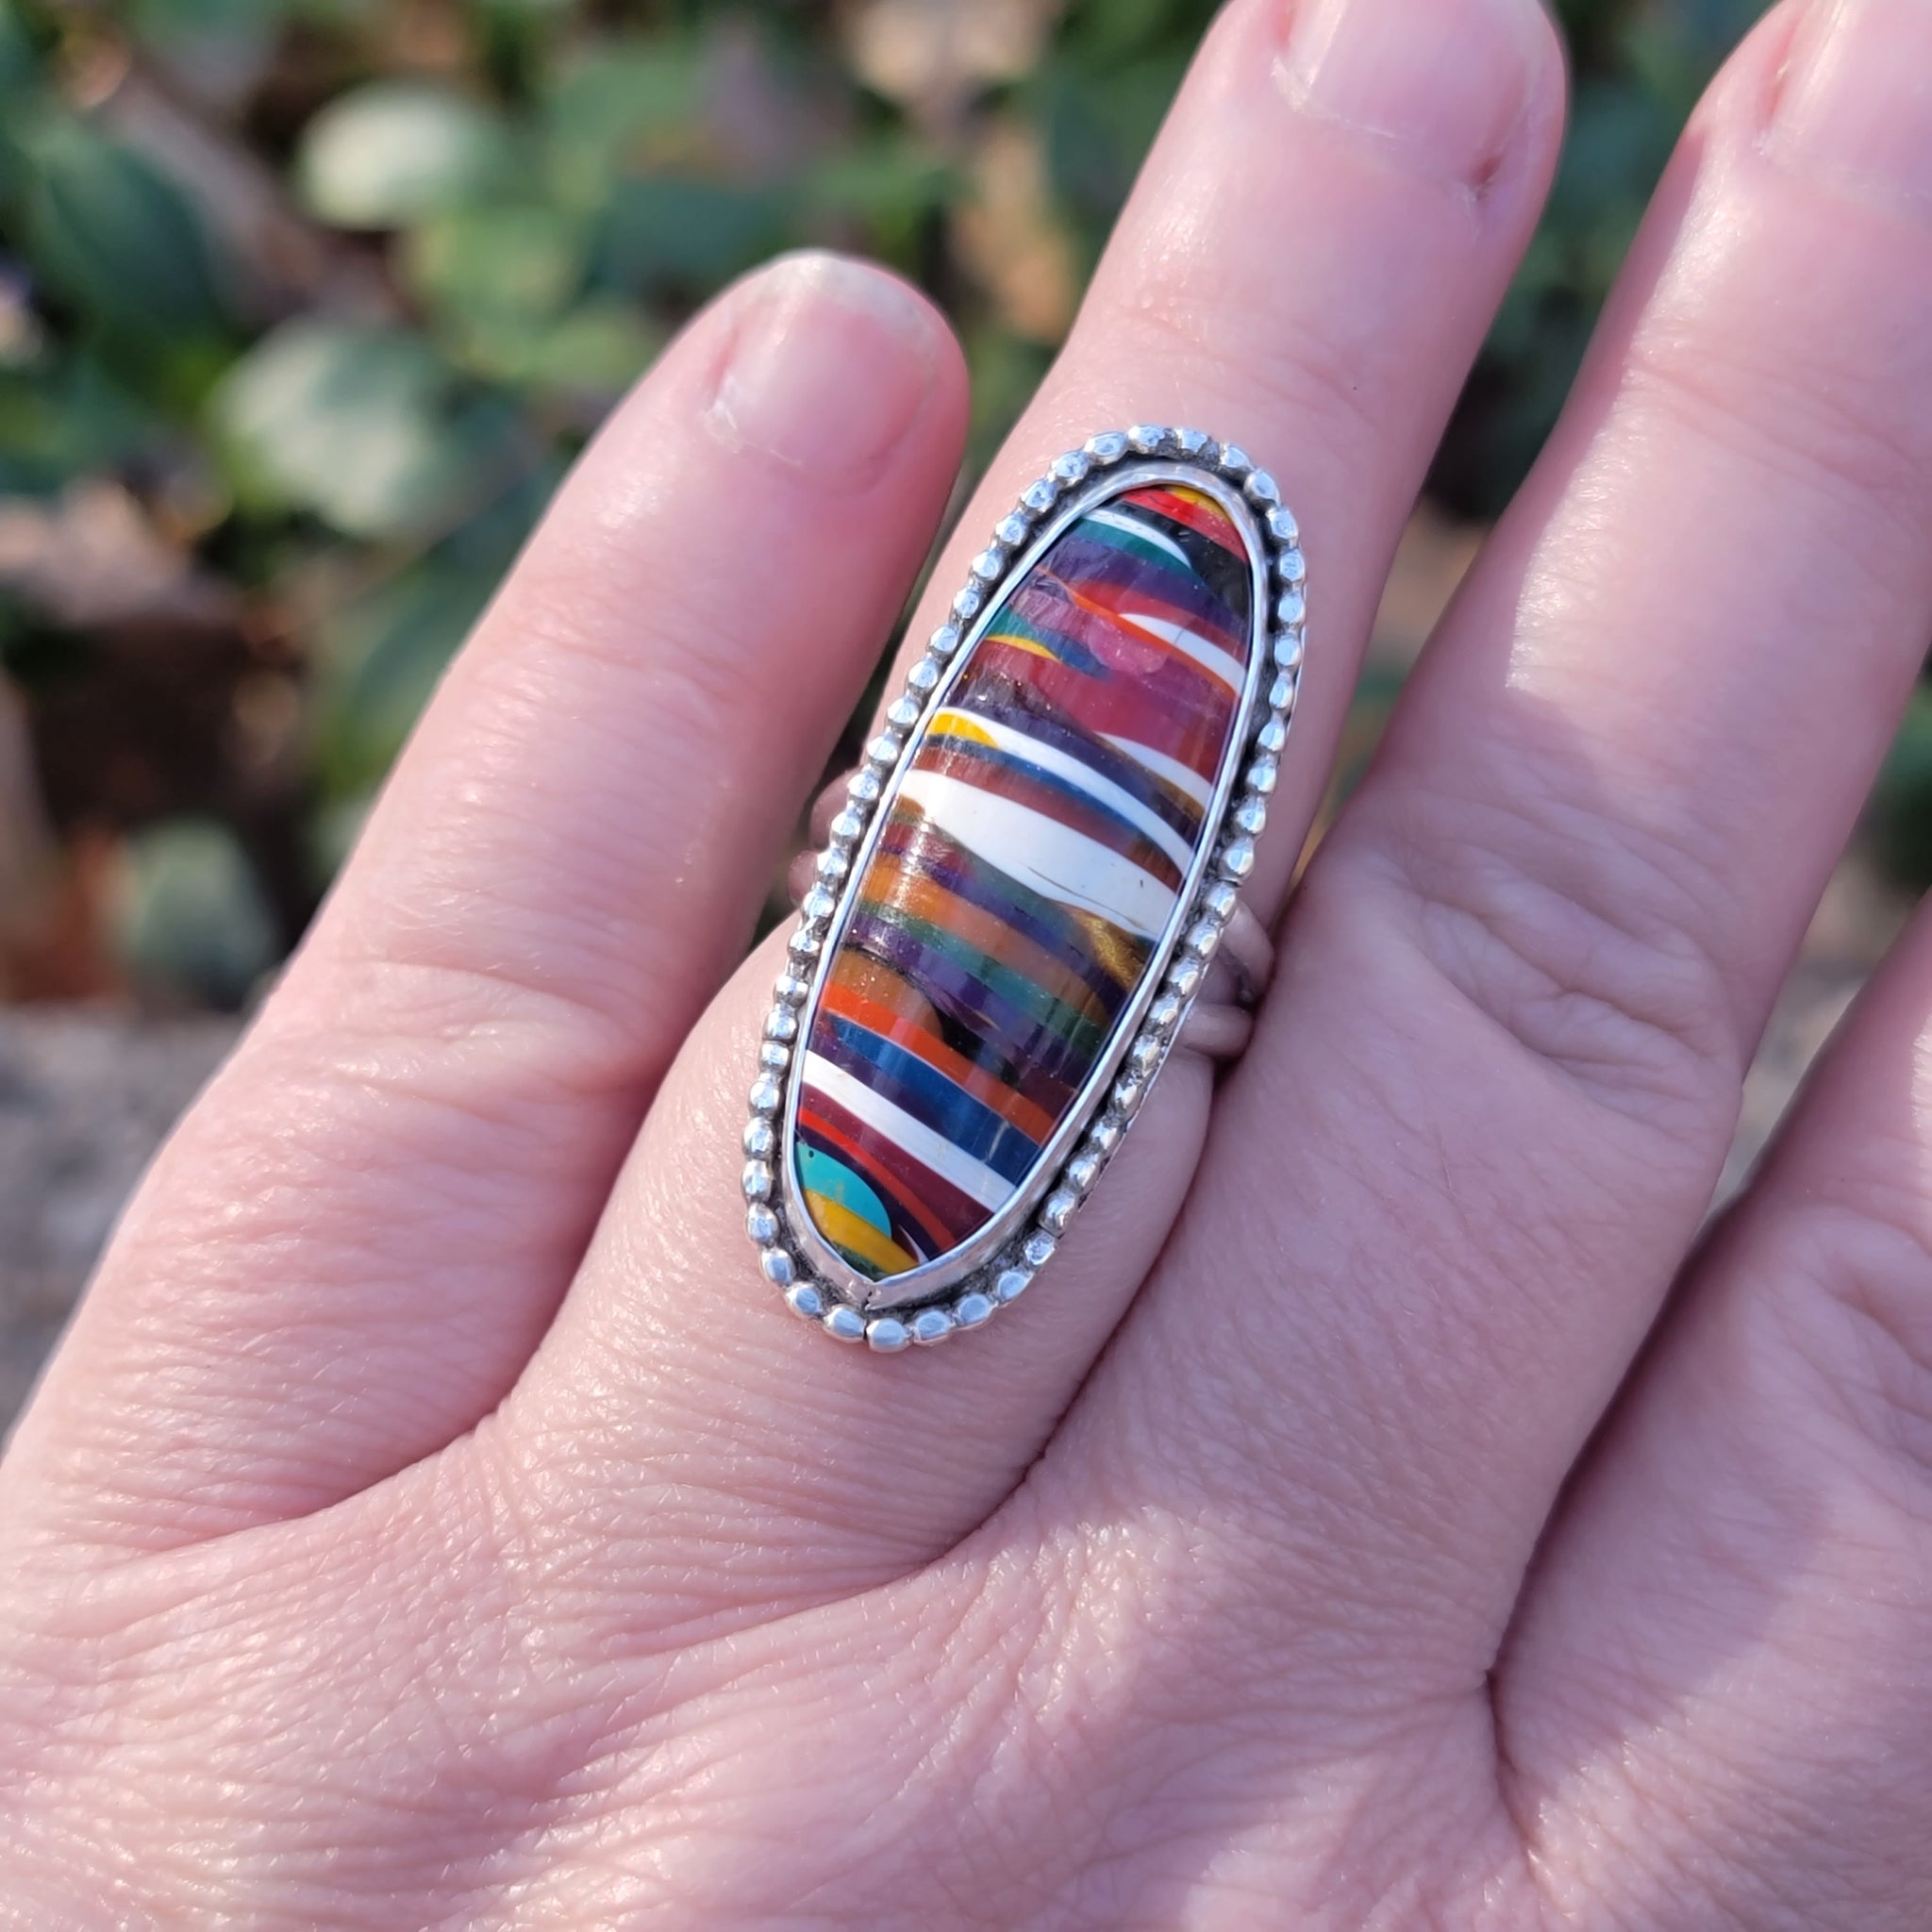 Colorburst Striped Surfite Ring in Sterling Silver Size 8